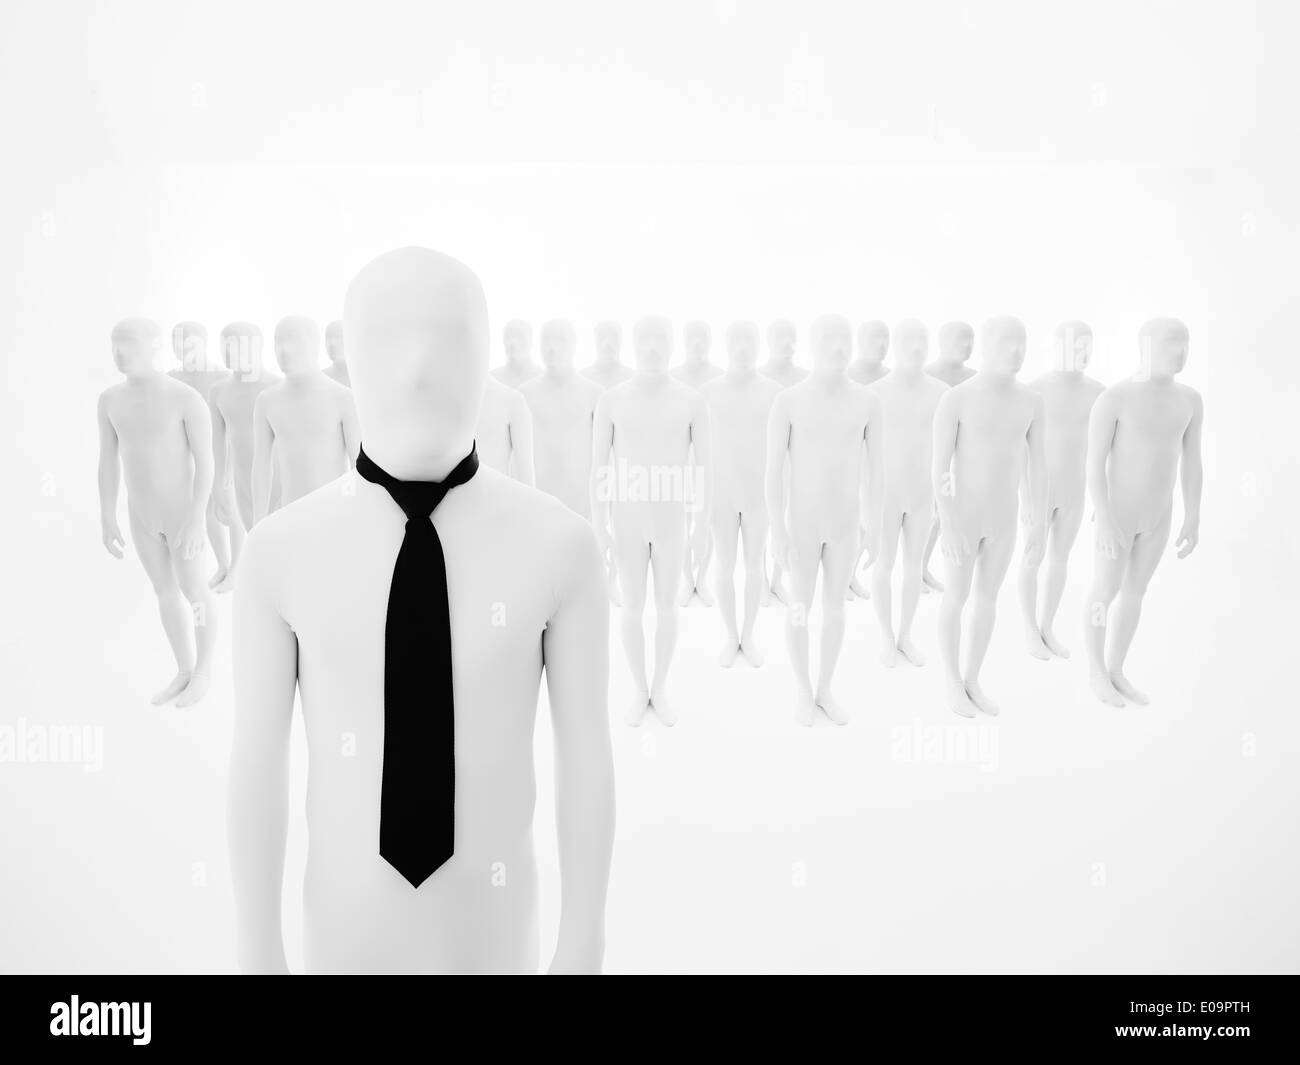 leading man dressed in white with black tie, with white mannequins arranged in multiple rows in background Stock Photo